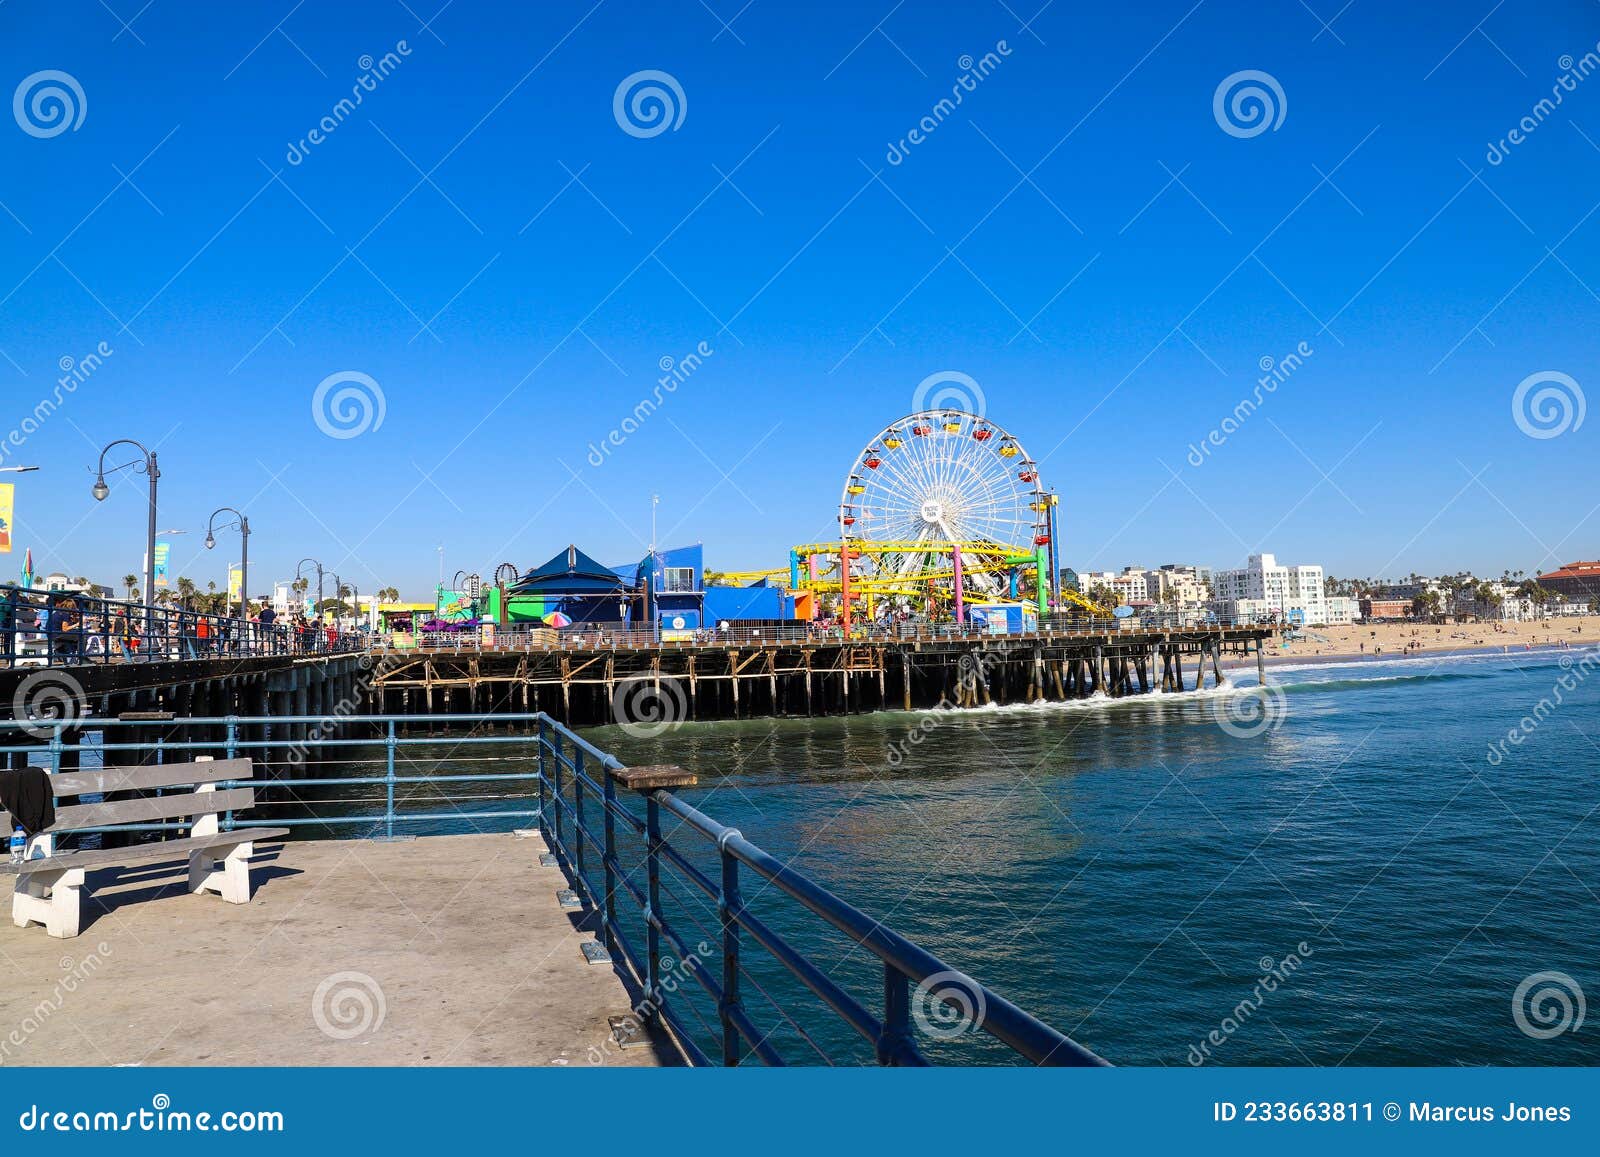 A Stunning Shot of a Colorful Ferris Wheel, Rollercoaster and Carnival  Games on a Long Brown Wooden Pier Editorial Photo - Image of buildings,  colorful: 233663811